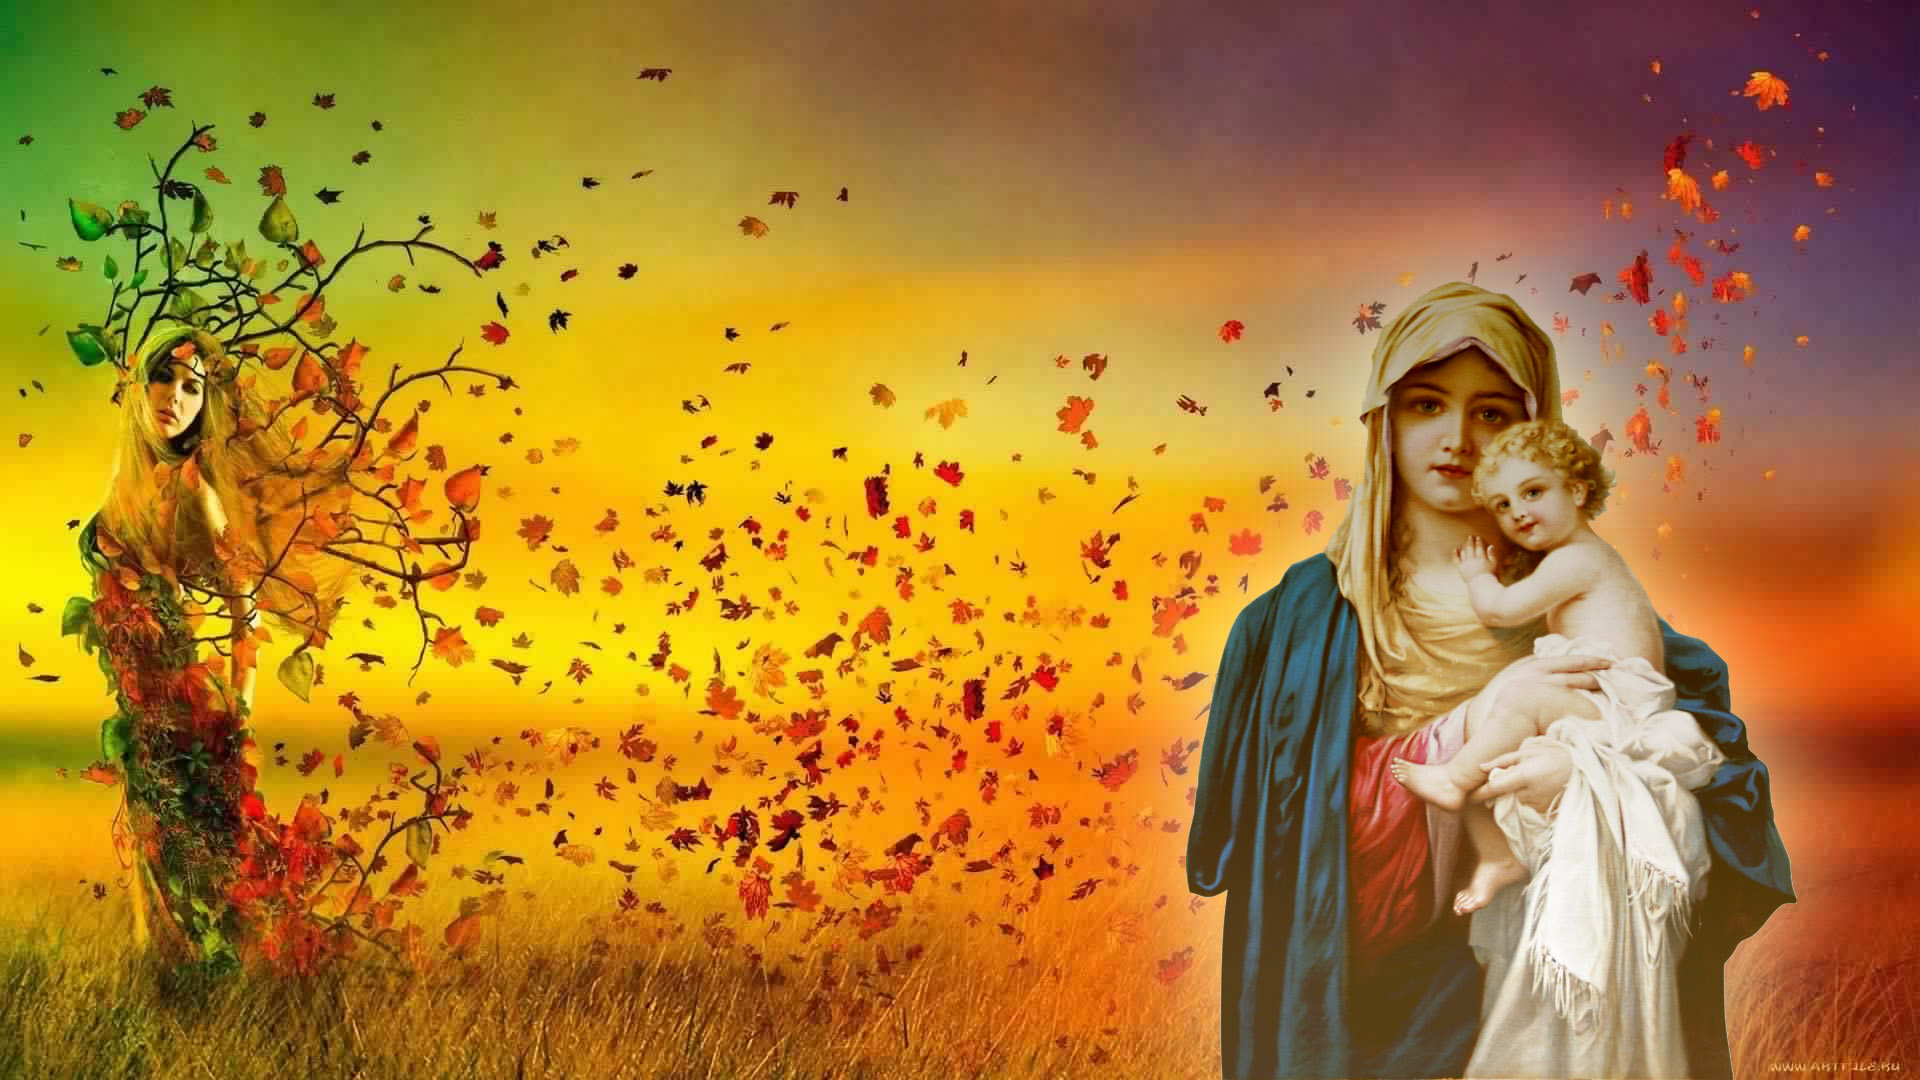 Mother Mary Wallpapers Hd - HD Wallpaper 